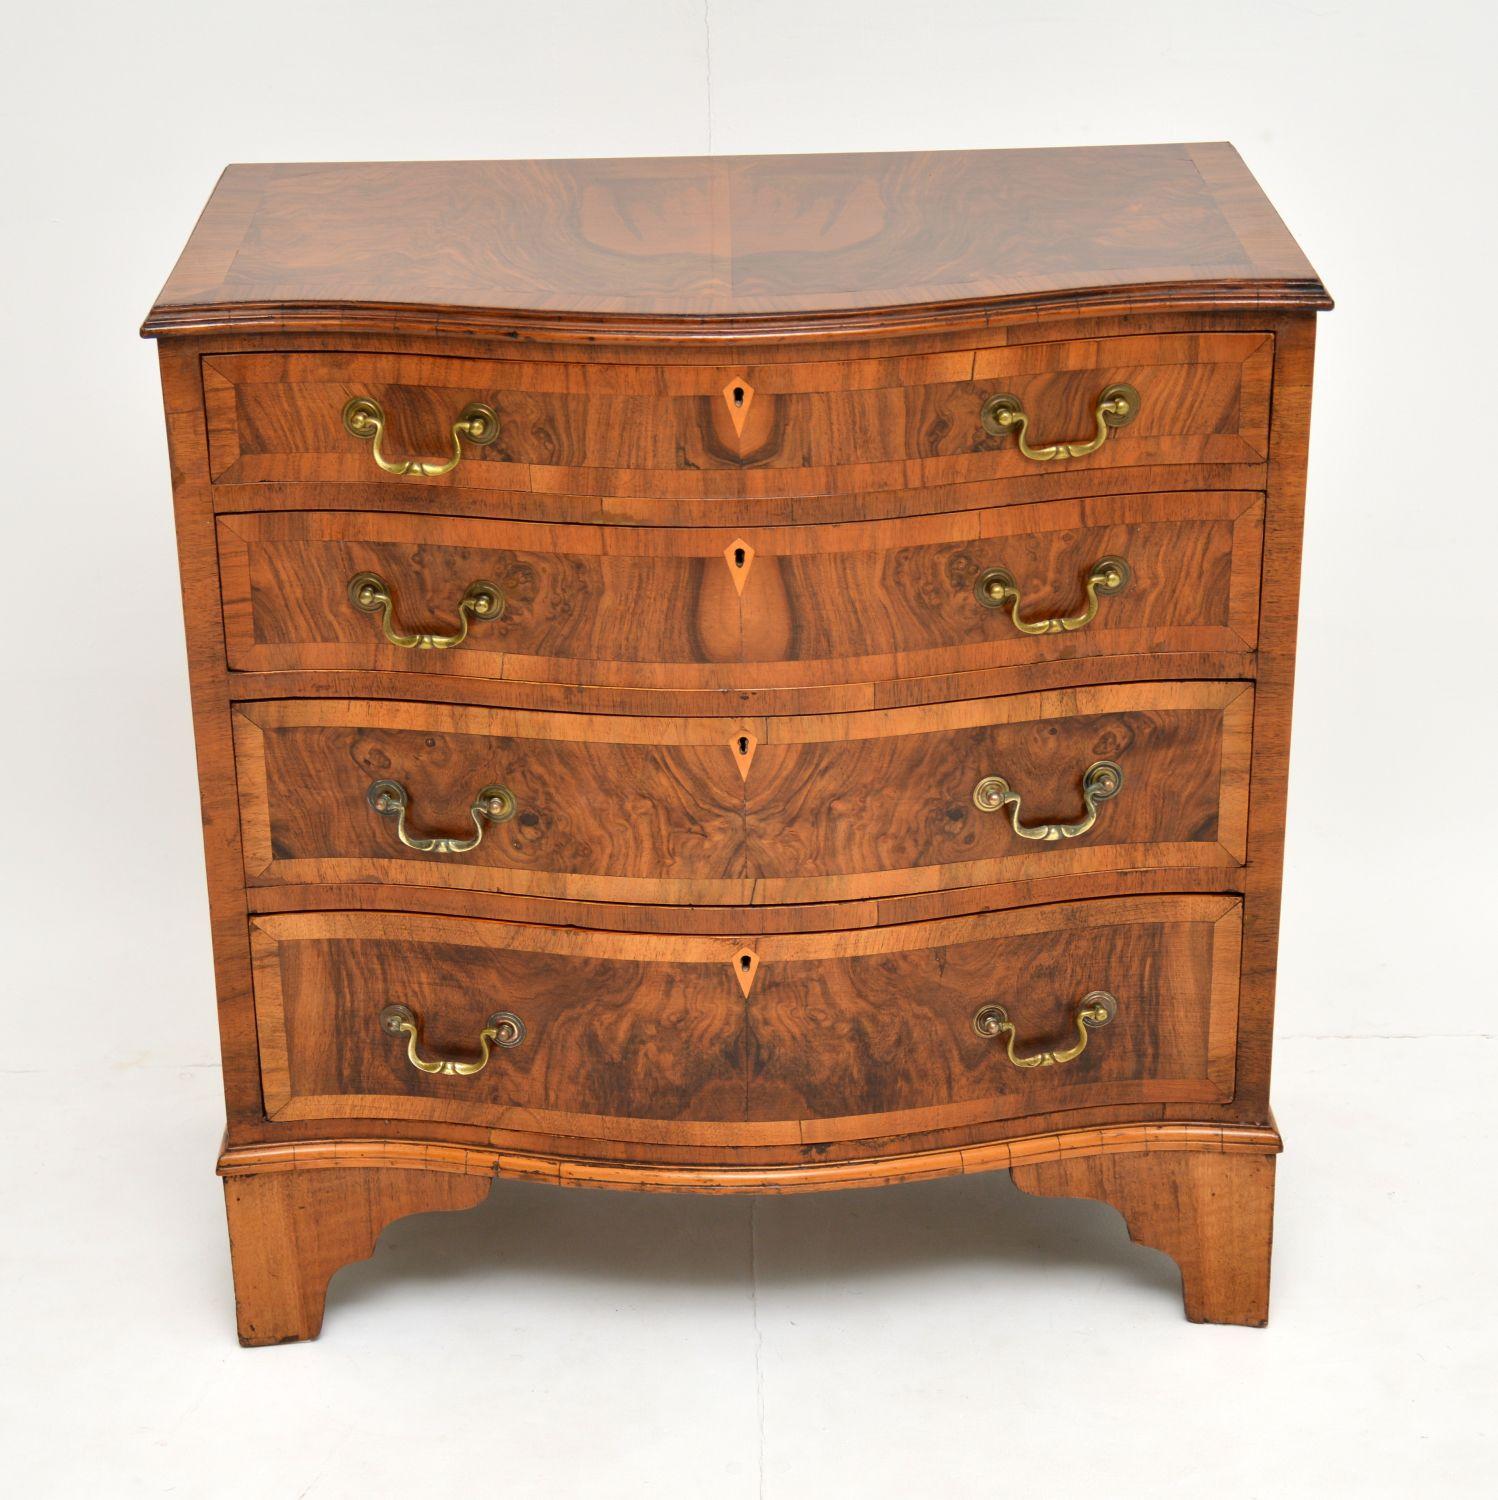 A beautiful antique chest of drawers in highly figured and burr walnut, dating from circa 1900-1910 period. It is in the classic Georgian style, with a lovely serpentine shaped front on bracket feet.

The walnut veneers are stunning throughout,